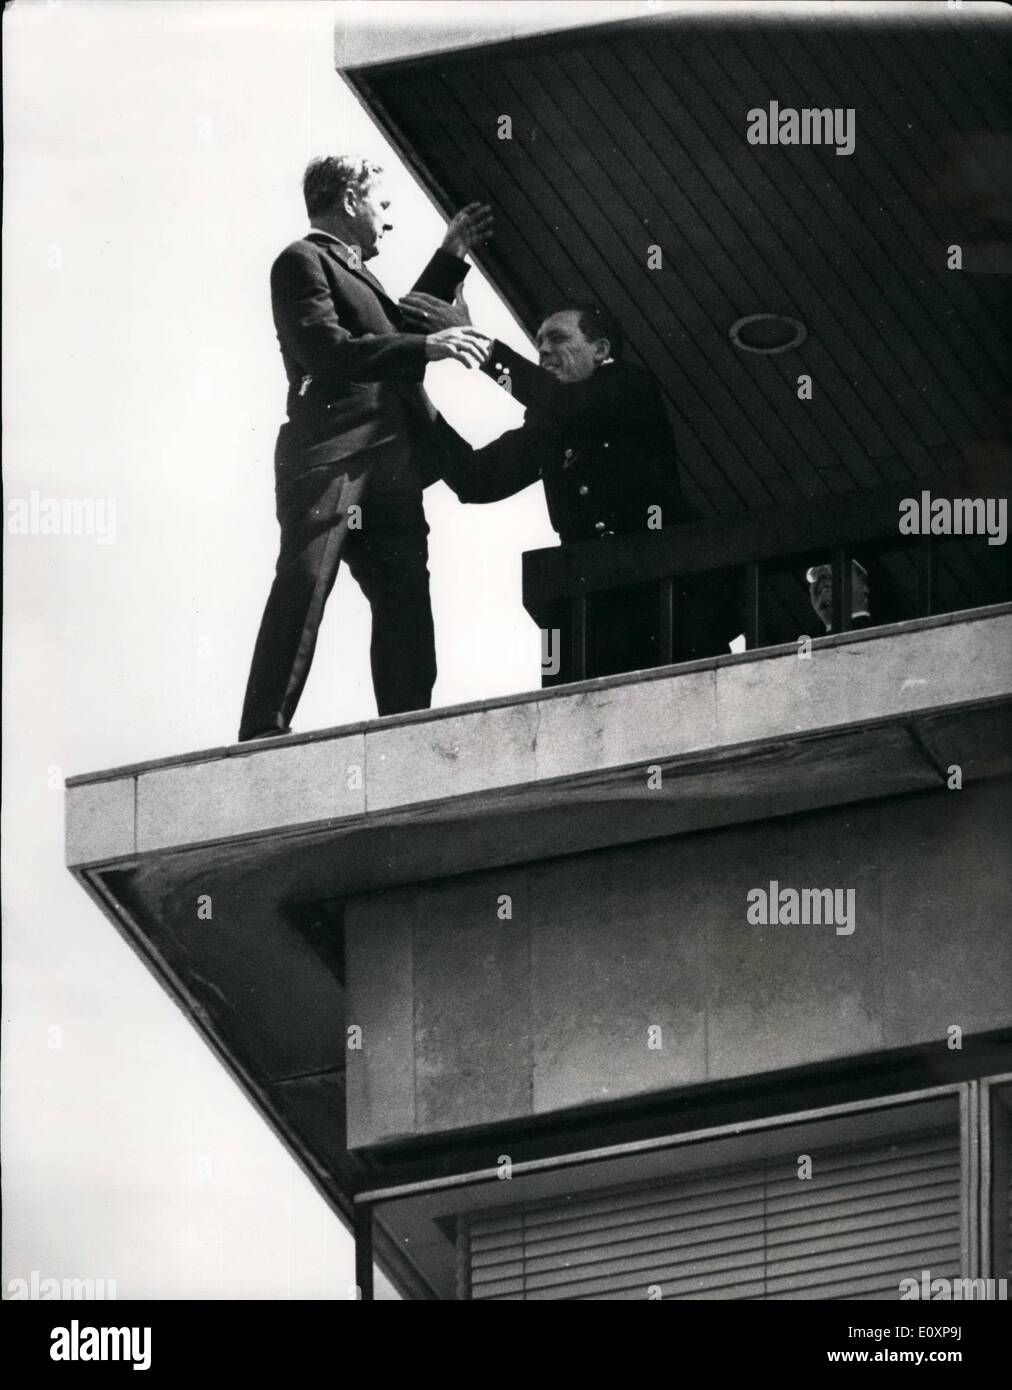 Jul. 07, 1967 - DRAMA AT NEW ZEALAND HOUSE: A man stood for over an hour today on the narrow ledge of the viewing balcony of New Zealand House, high above London. He was finally talked to and pulled in by a police officer. Photo shows The man is pulled to safety by a security officer-and was later taken to hospital. Stock Photo